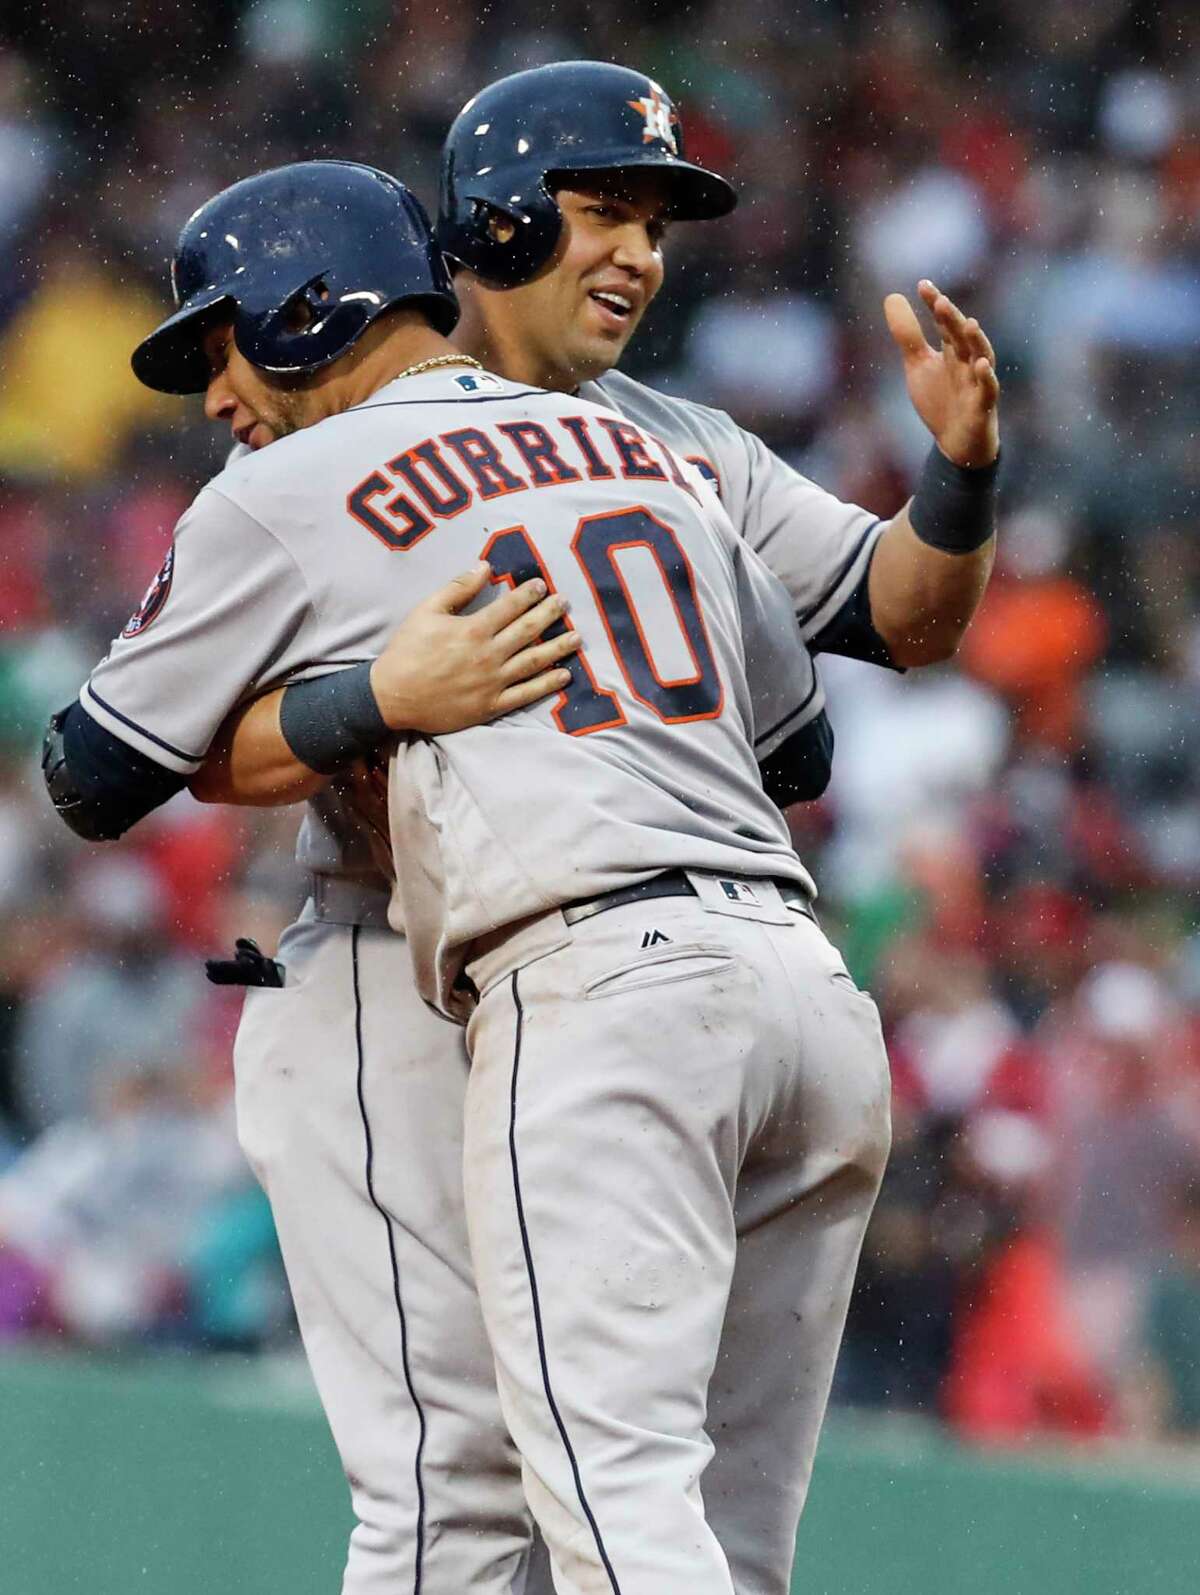 The Astros' Yuli Gurriel shows an affection for insurance runs after pinch hitter Carlos Beltran's ninth-inning RBI double, which made it 5-3 and proved crucial.